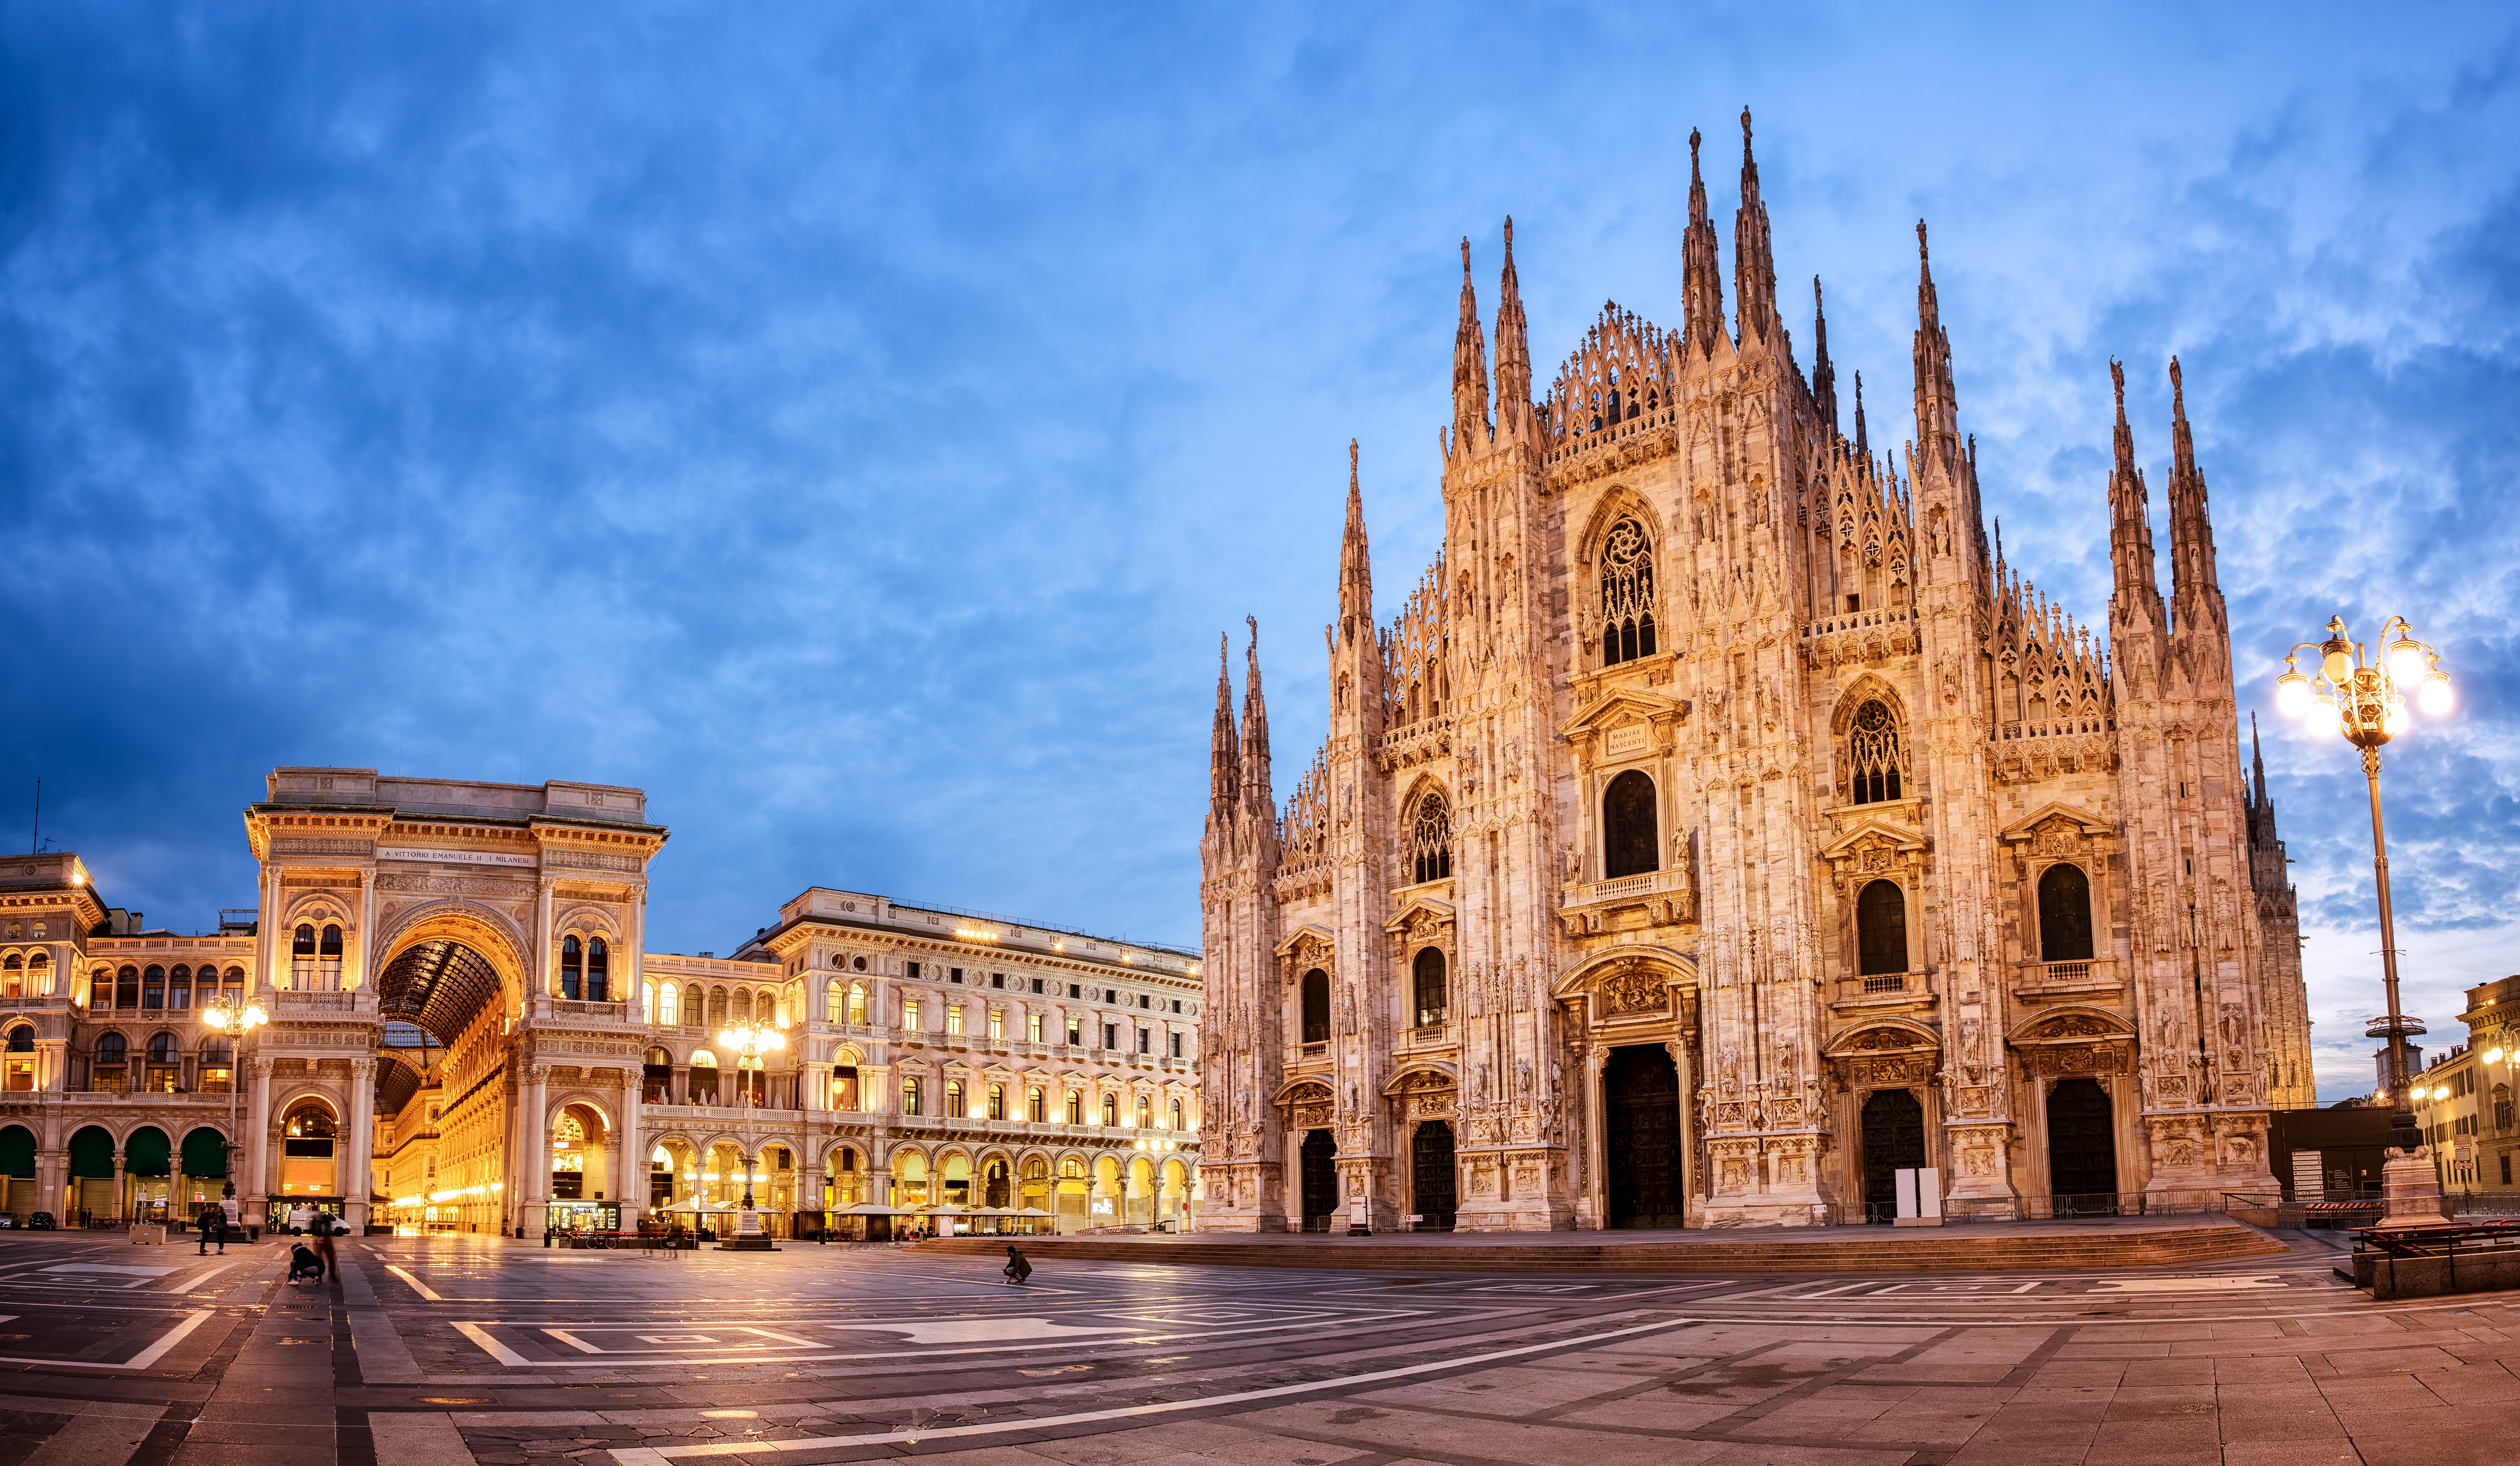 4-night Milan trip with flights and first-class hotels from $839